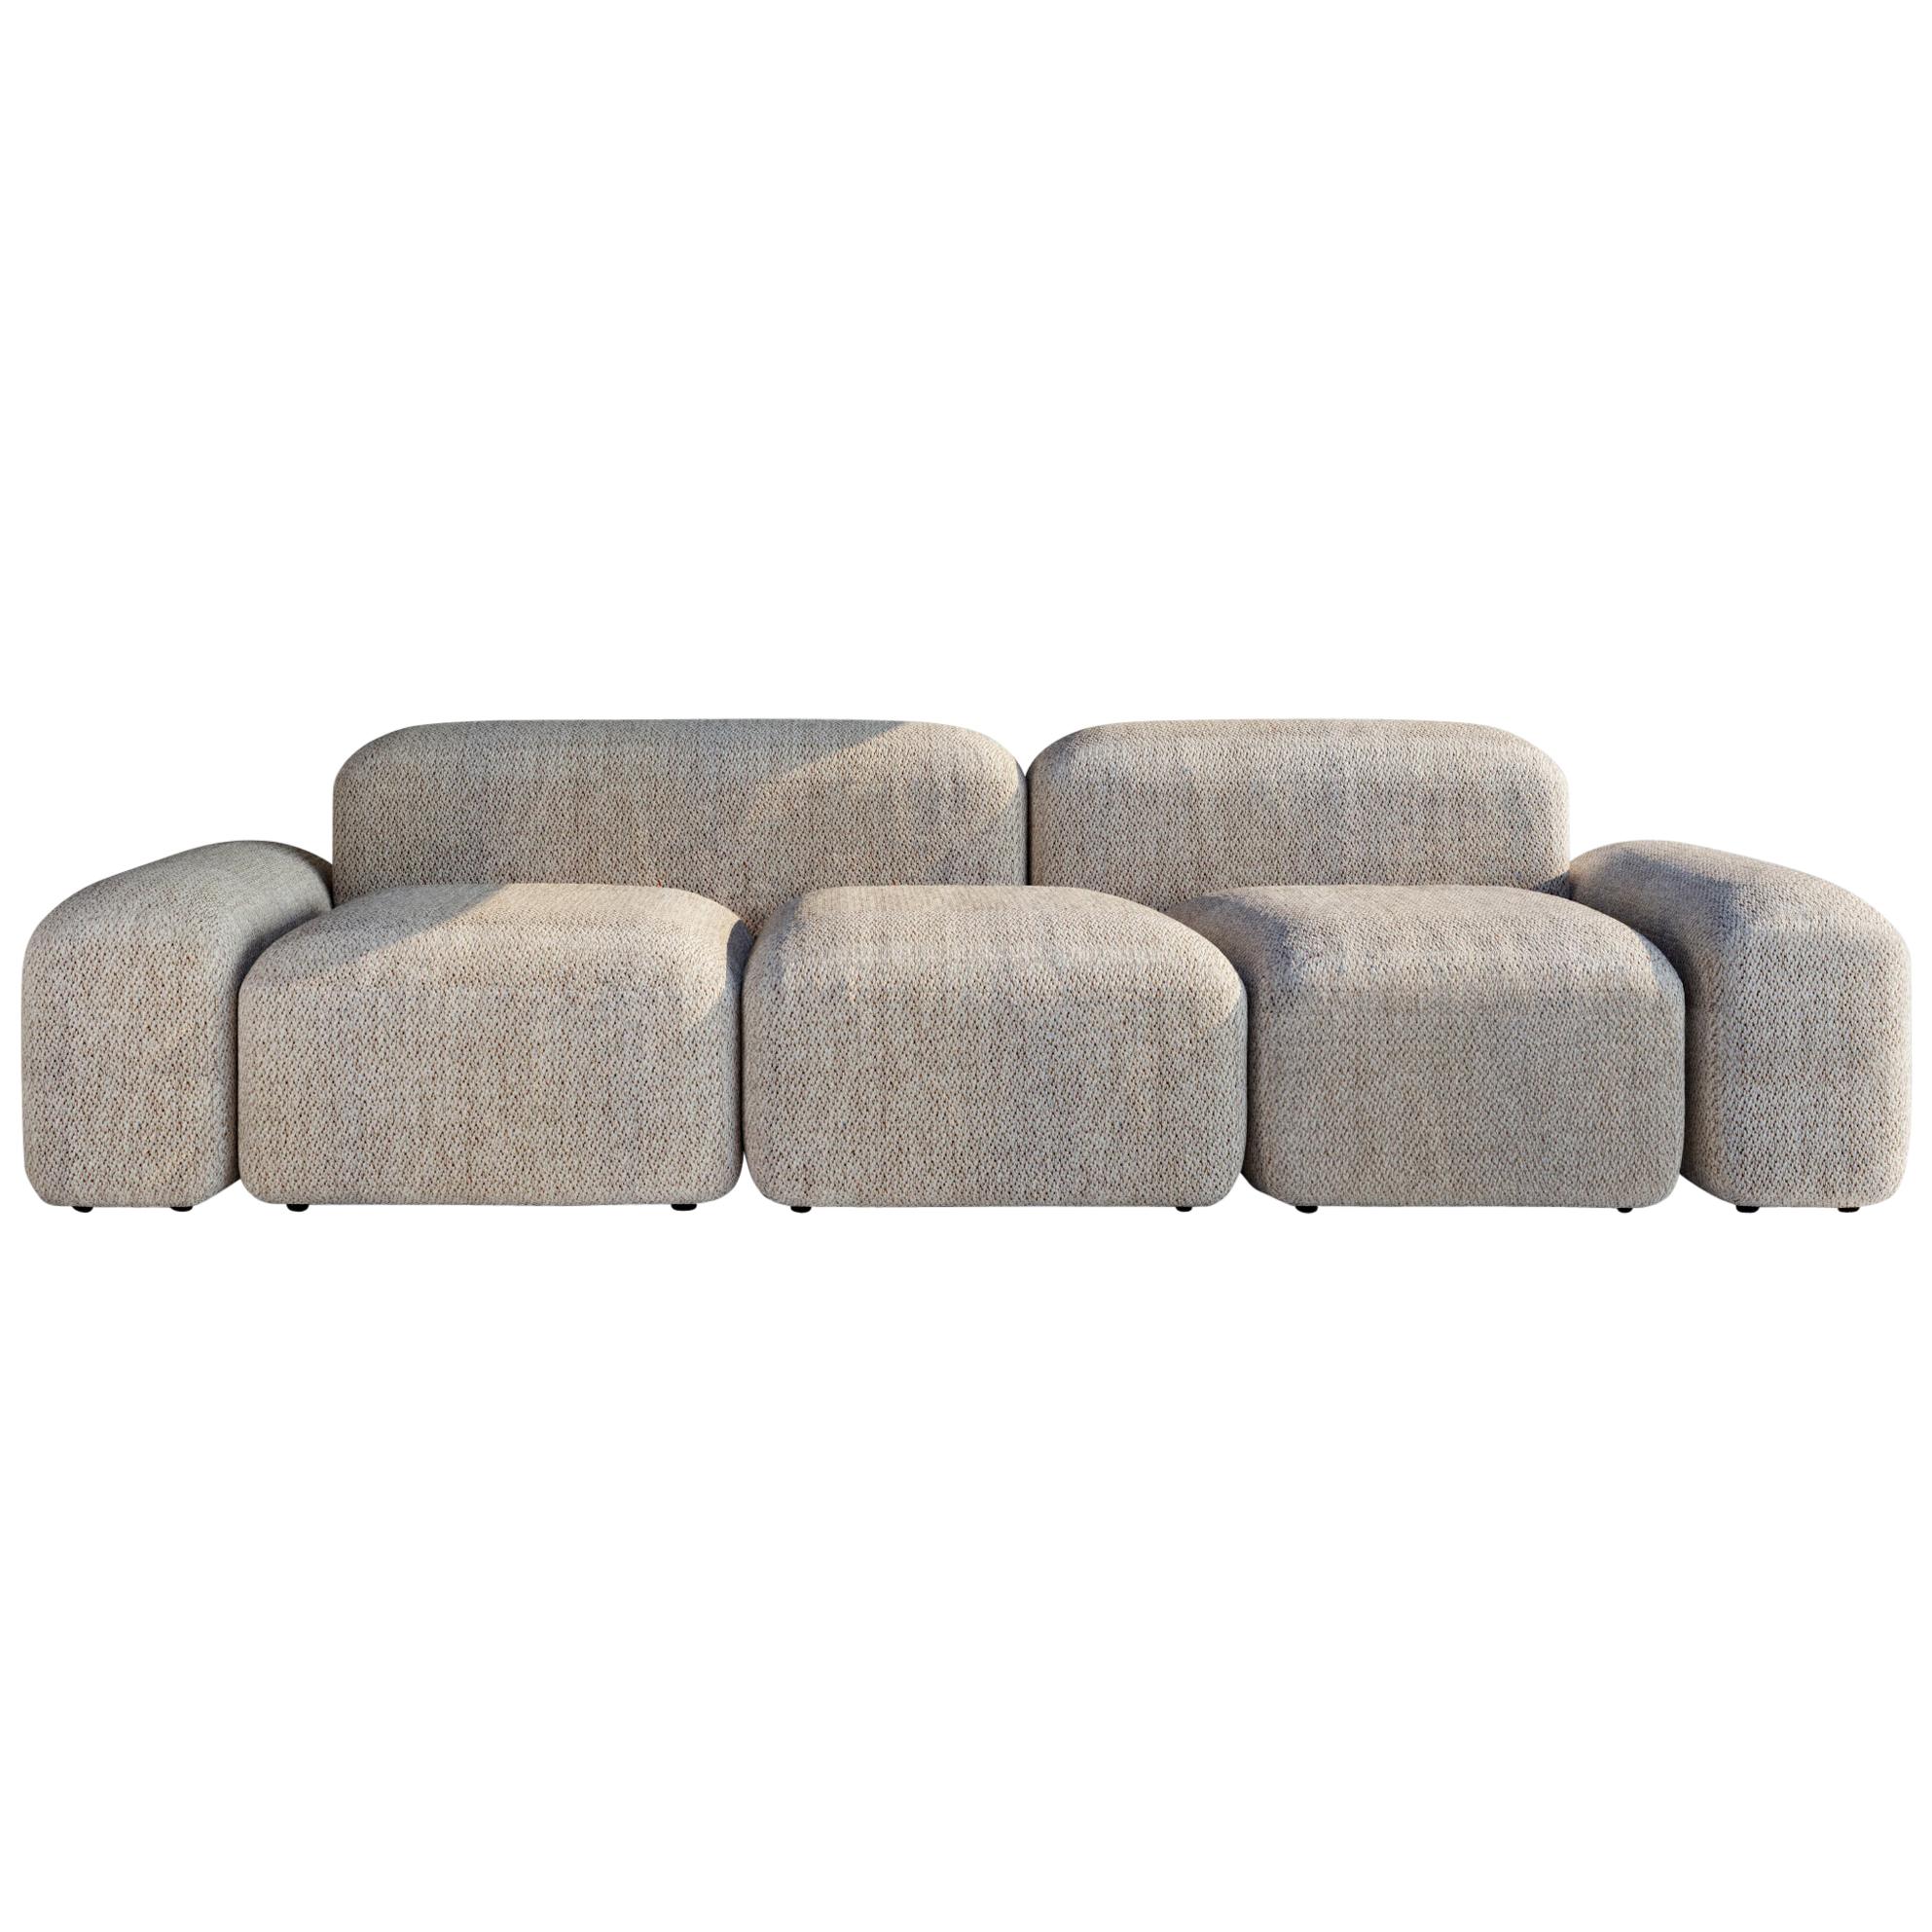 Modular and Customizable Sofa 'Lapis' 060 'Many Layouts and Fabrics Available' For Sale